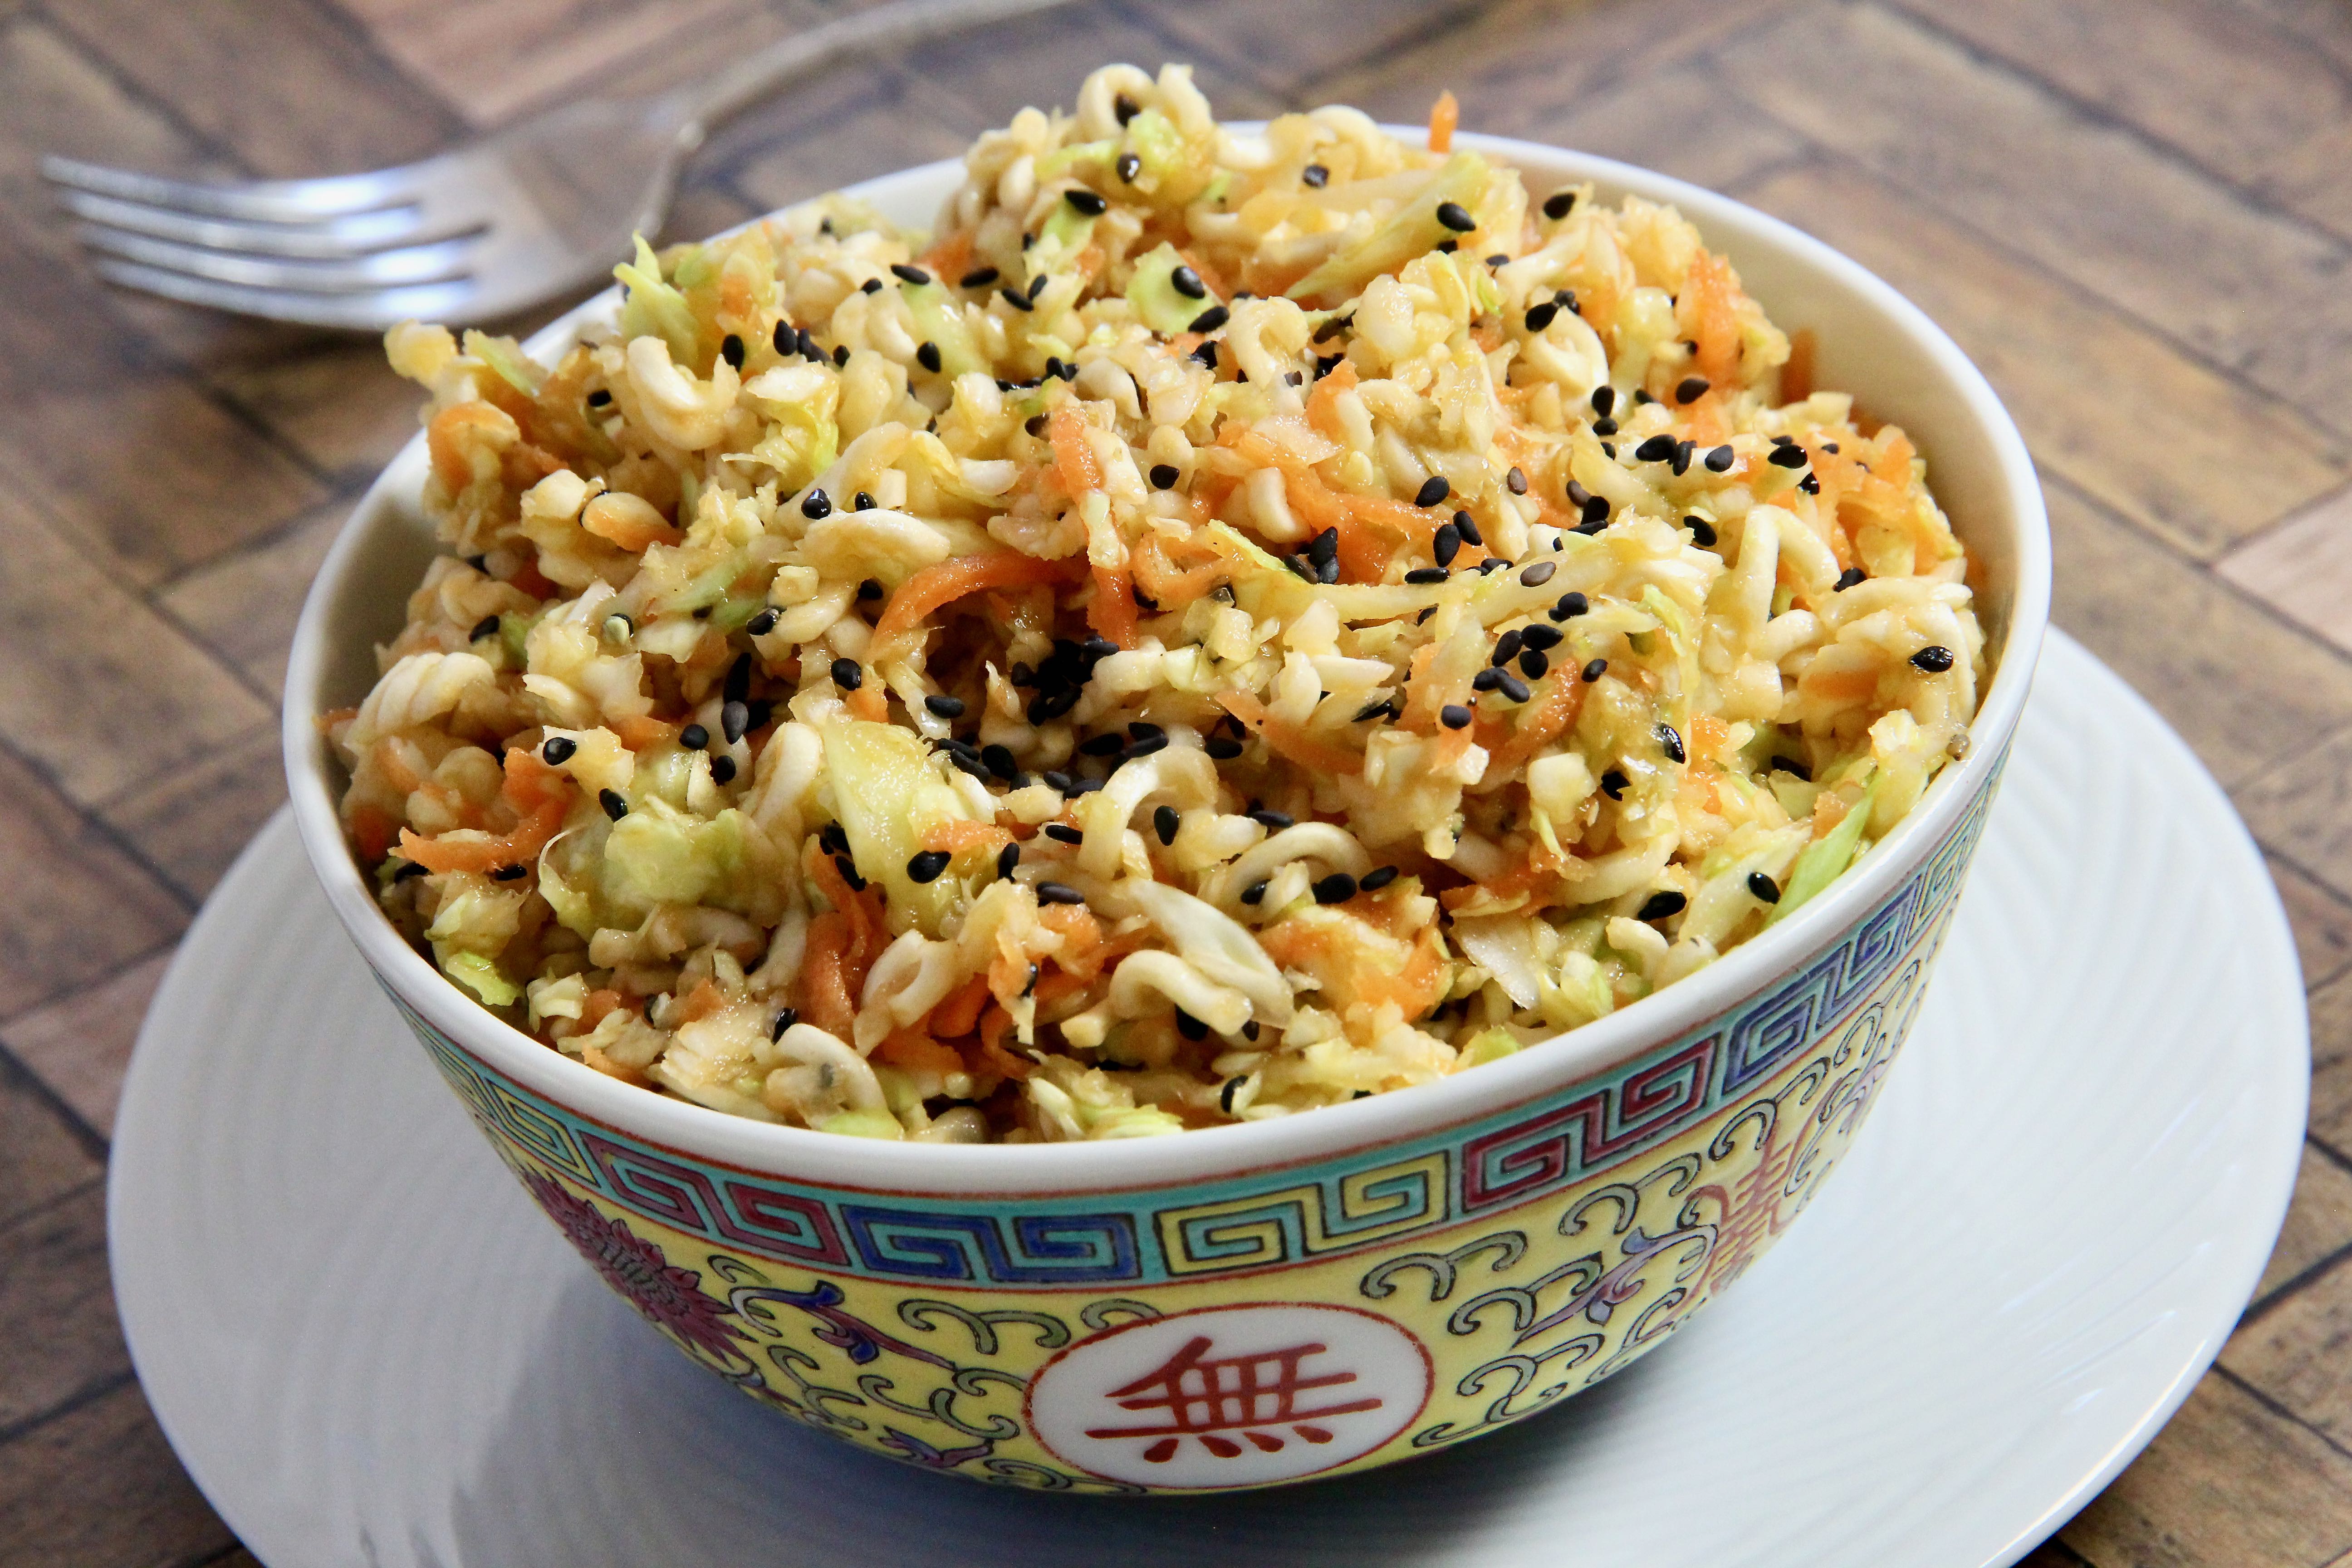 Asian style coleslaw